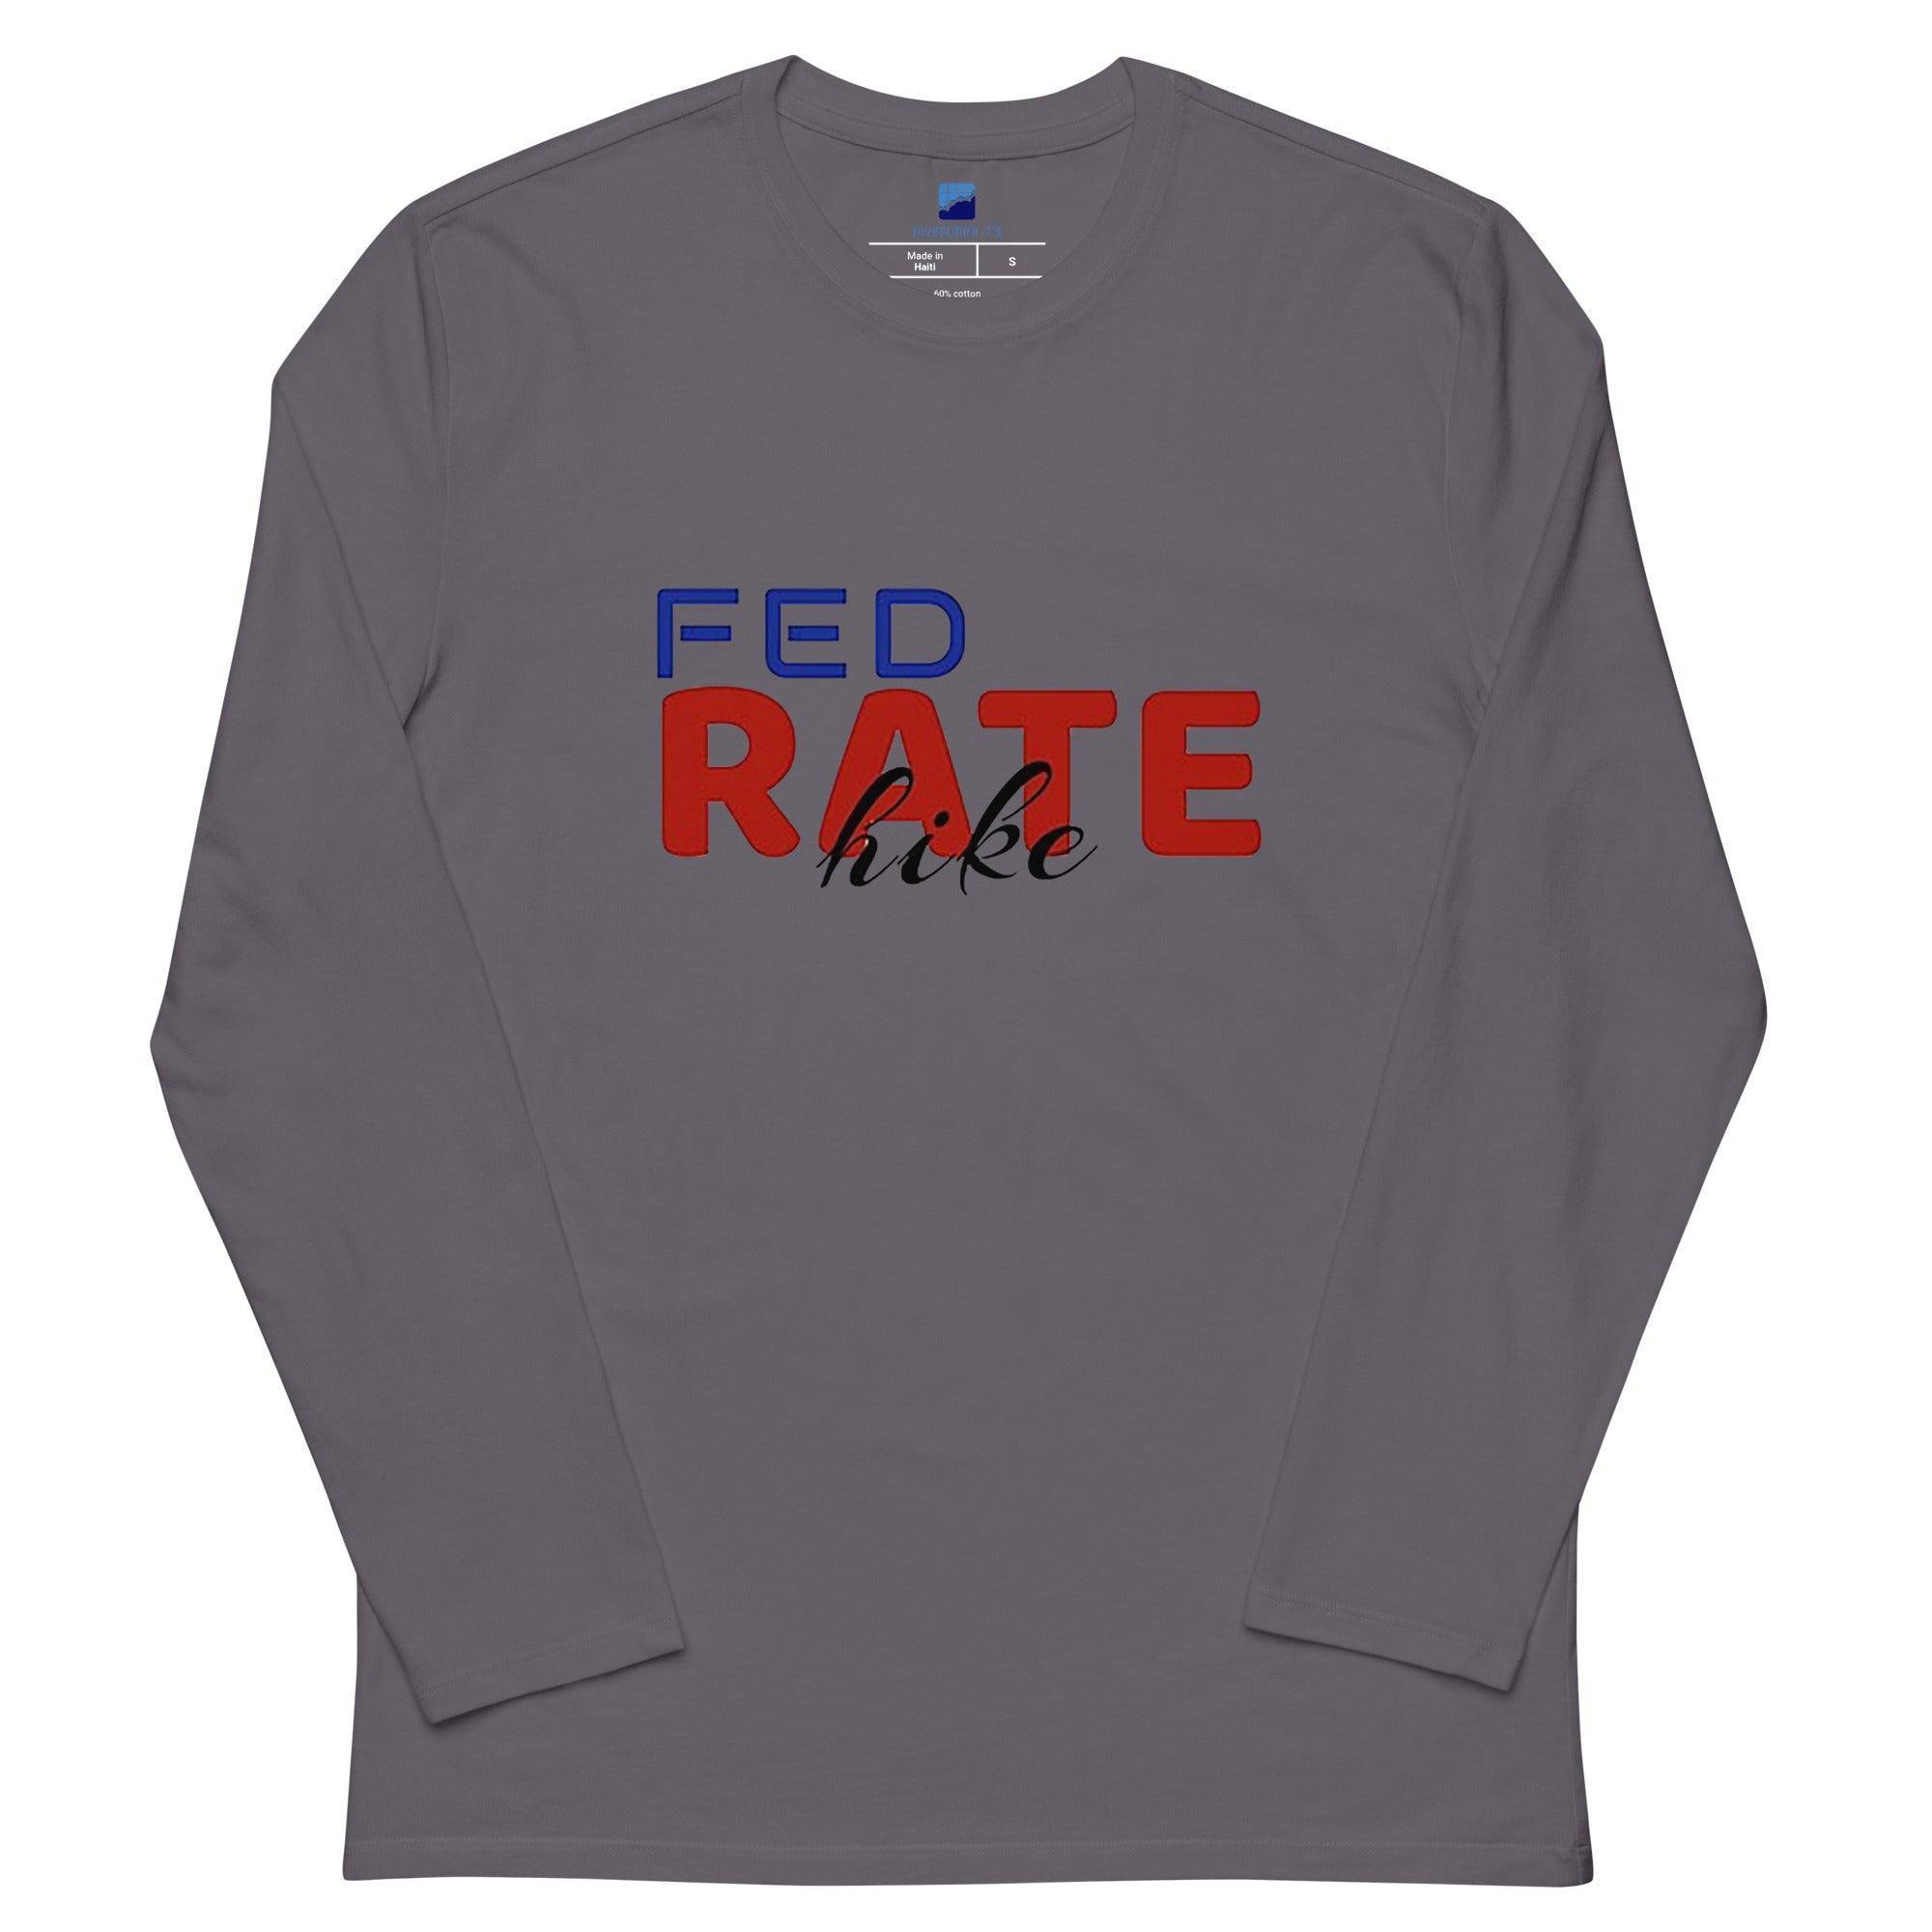 Fed Rate Hike Long Sleeve T-Shirt - InvestmenTees